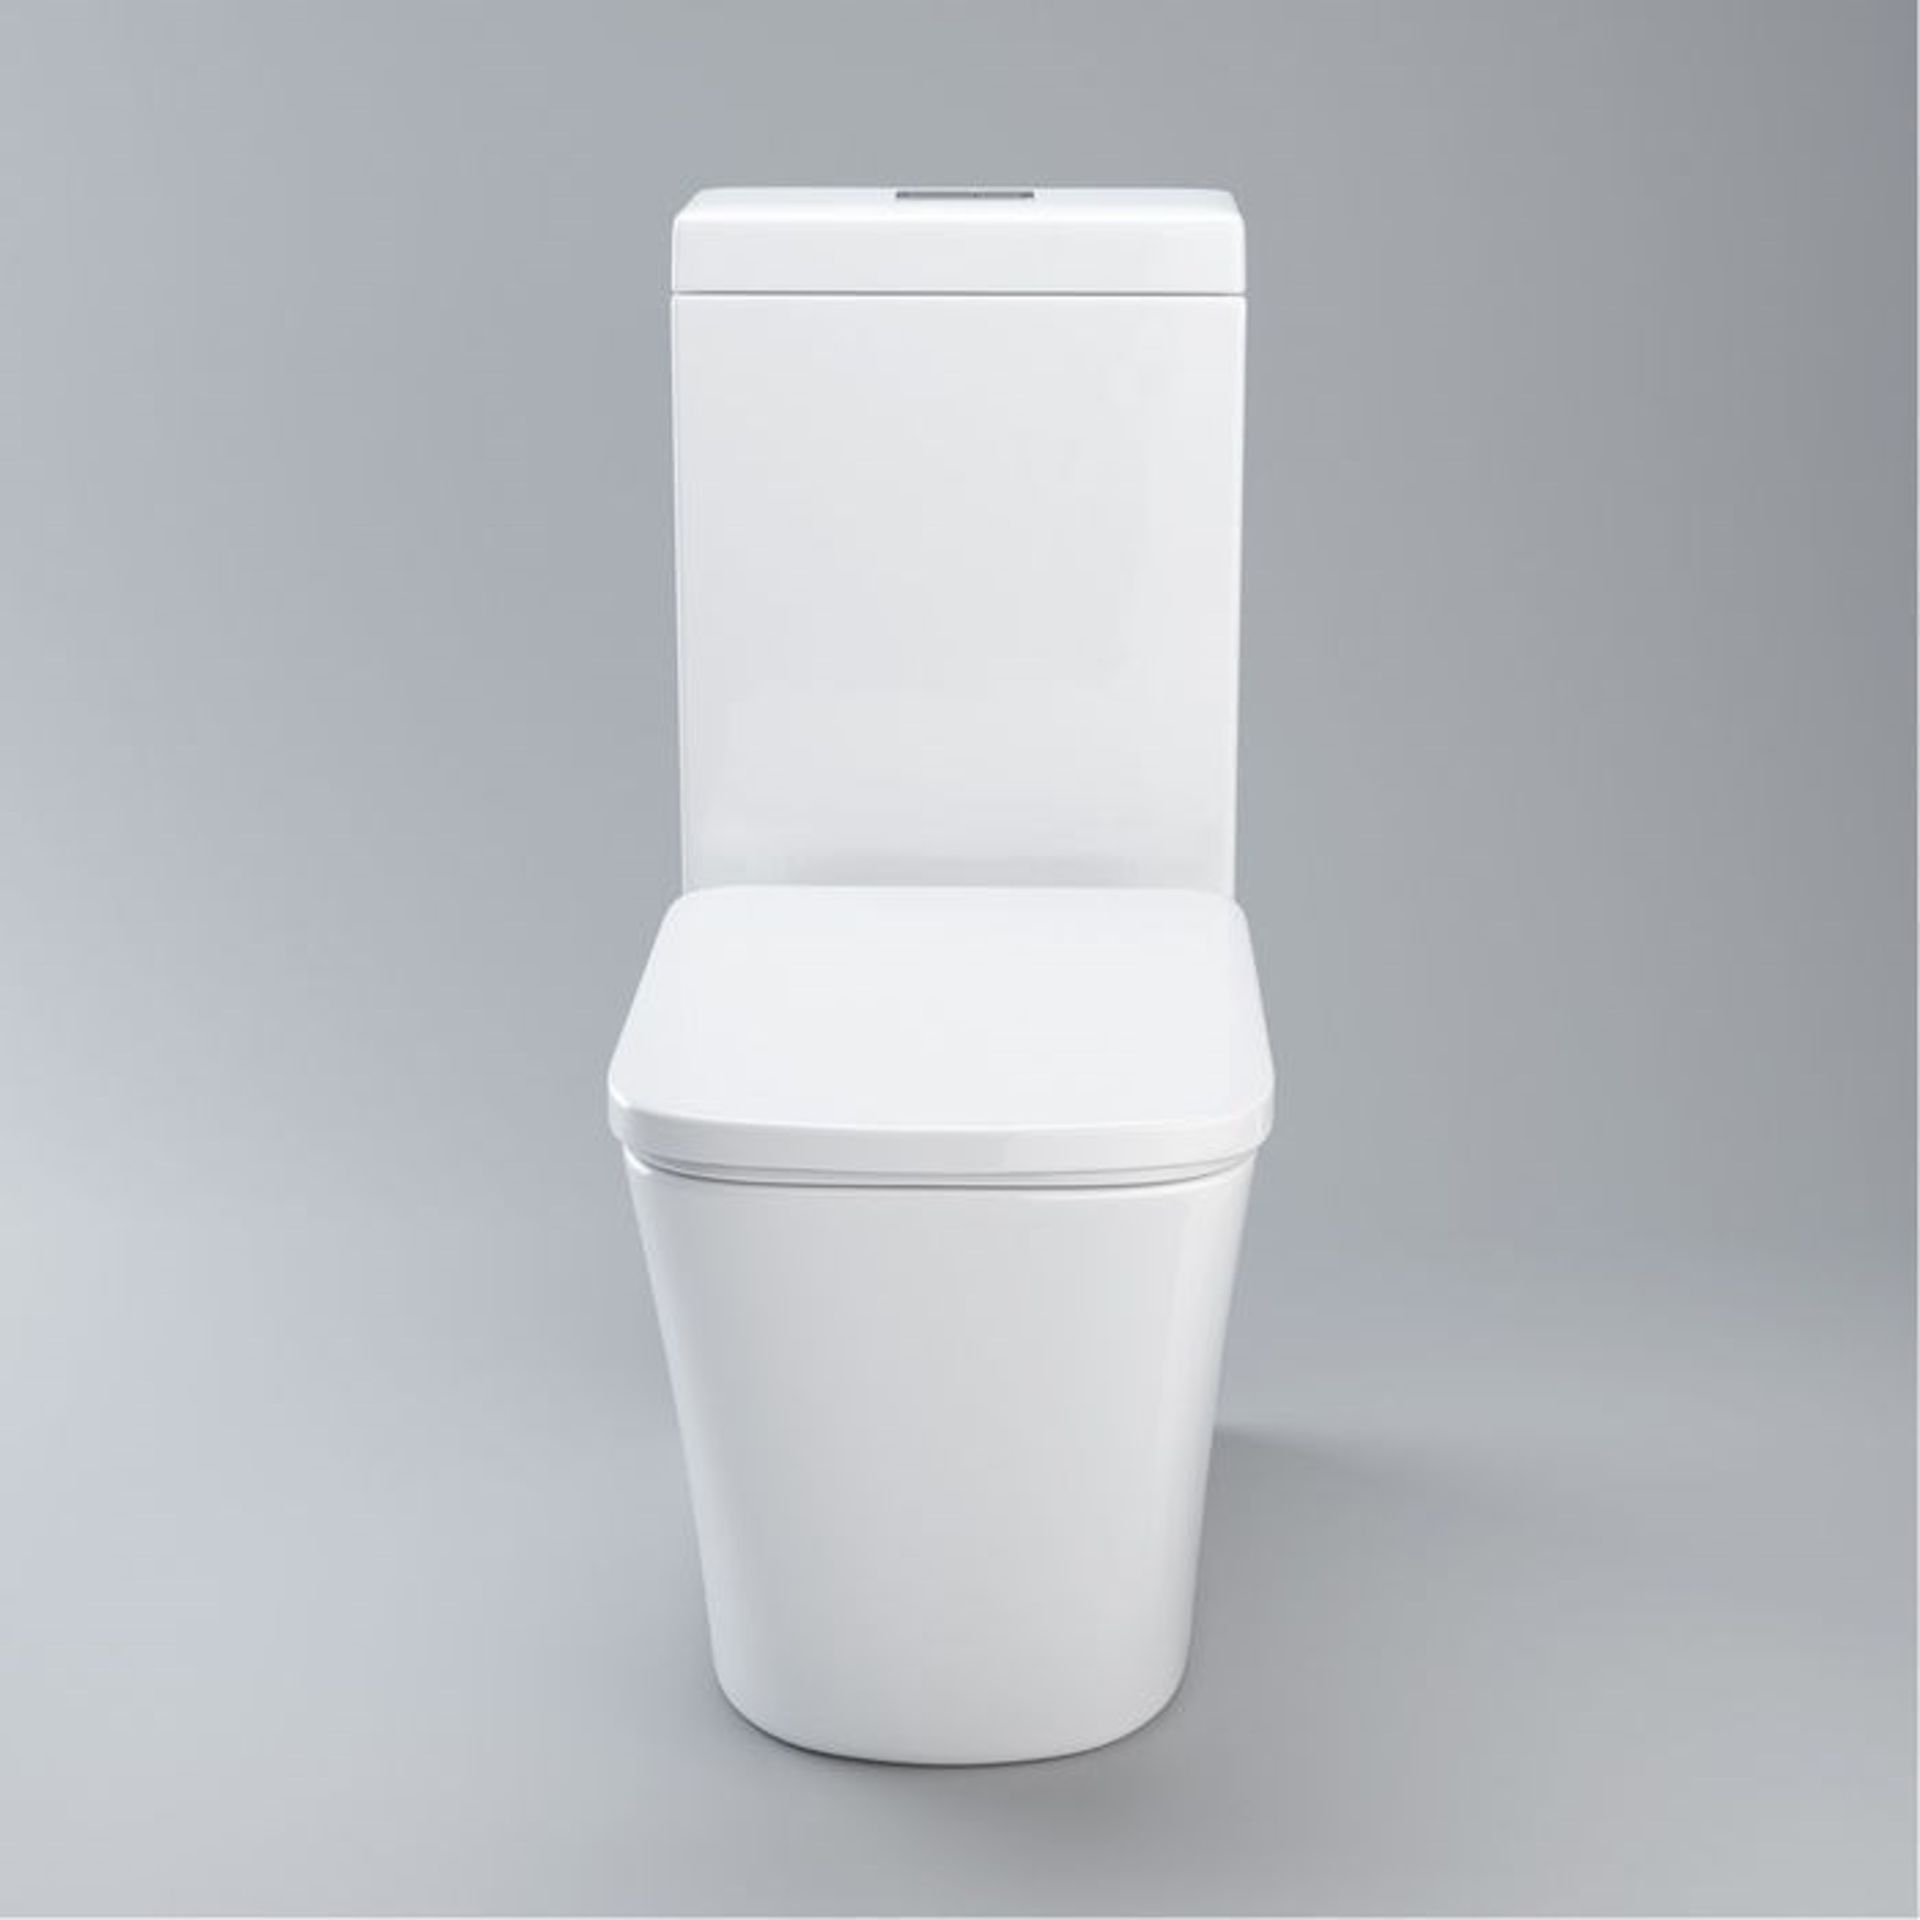 Florence Close Coupled Toilet & Cistern inc Soft Close Seat. Contemporary design finished... - Image 3 of 3